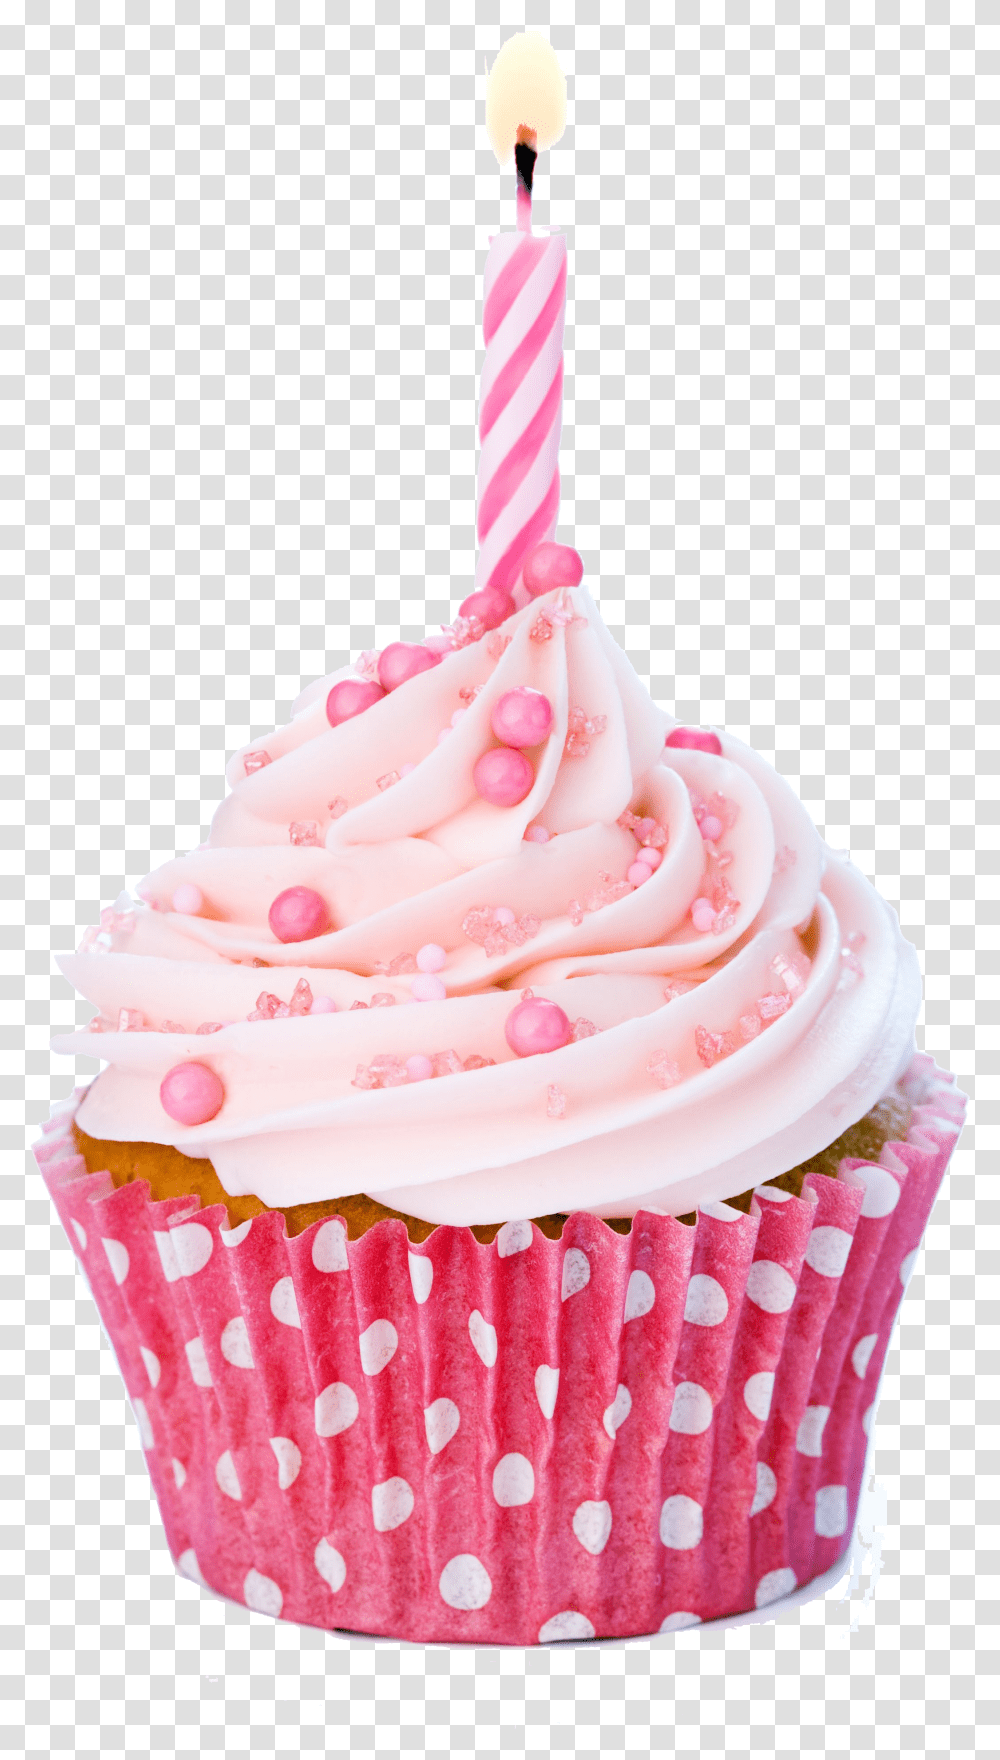 Download Free Vector Icing Cupcake Birthday Cup Cake With Candle Transparent Png